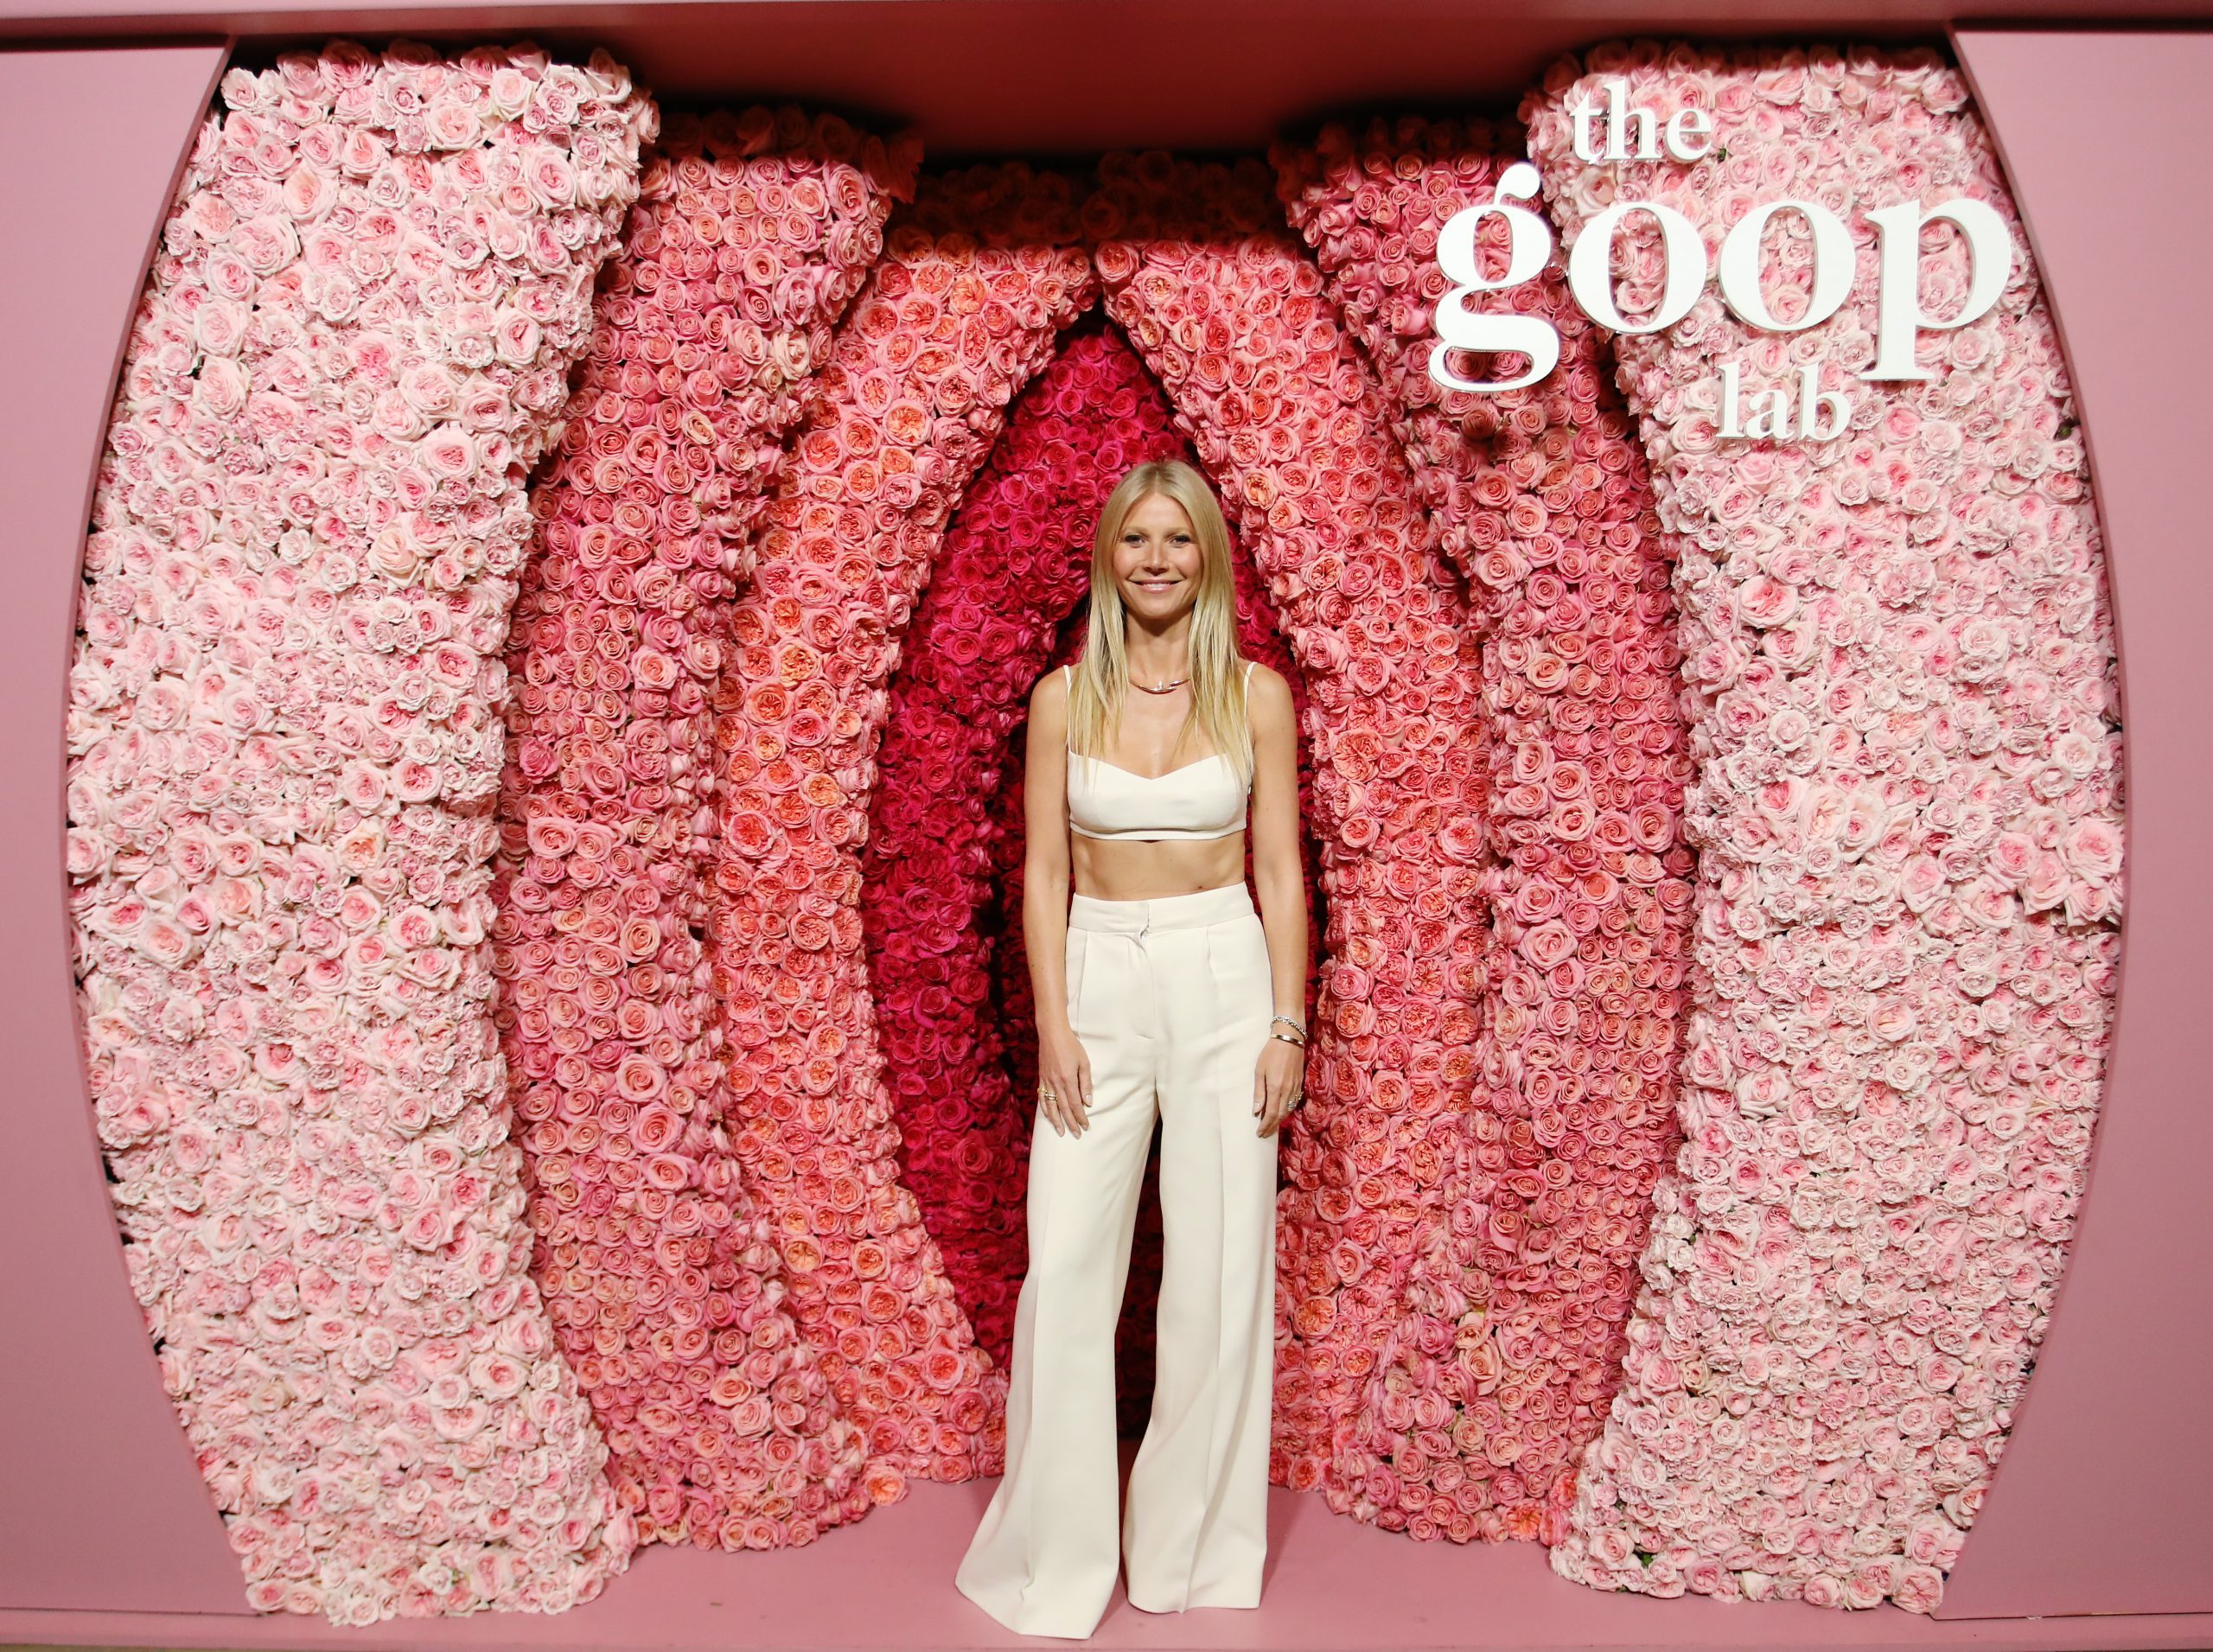 Gwyneth Paltrow Celebrates Her 48th Birthday By Posing In The Nude